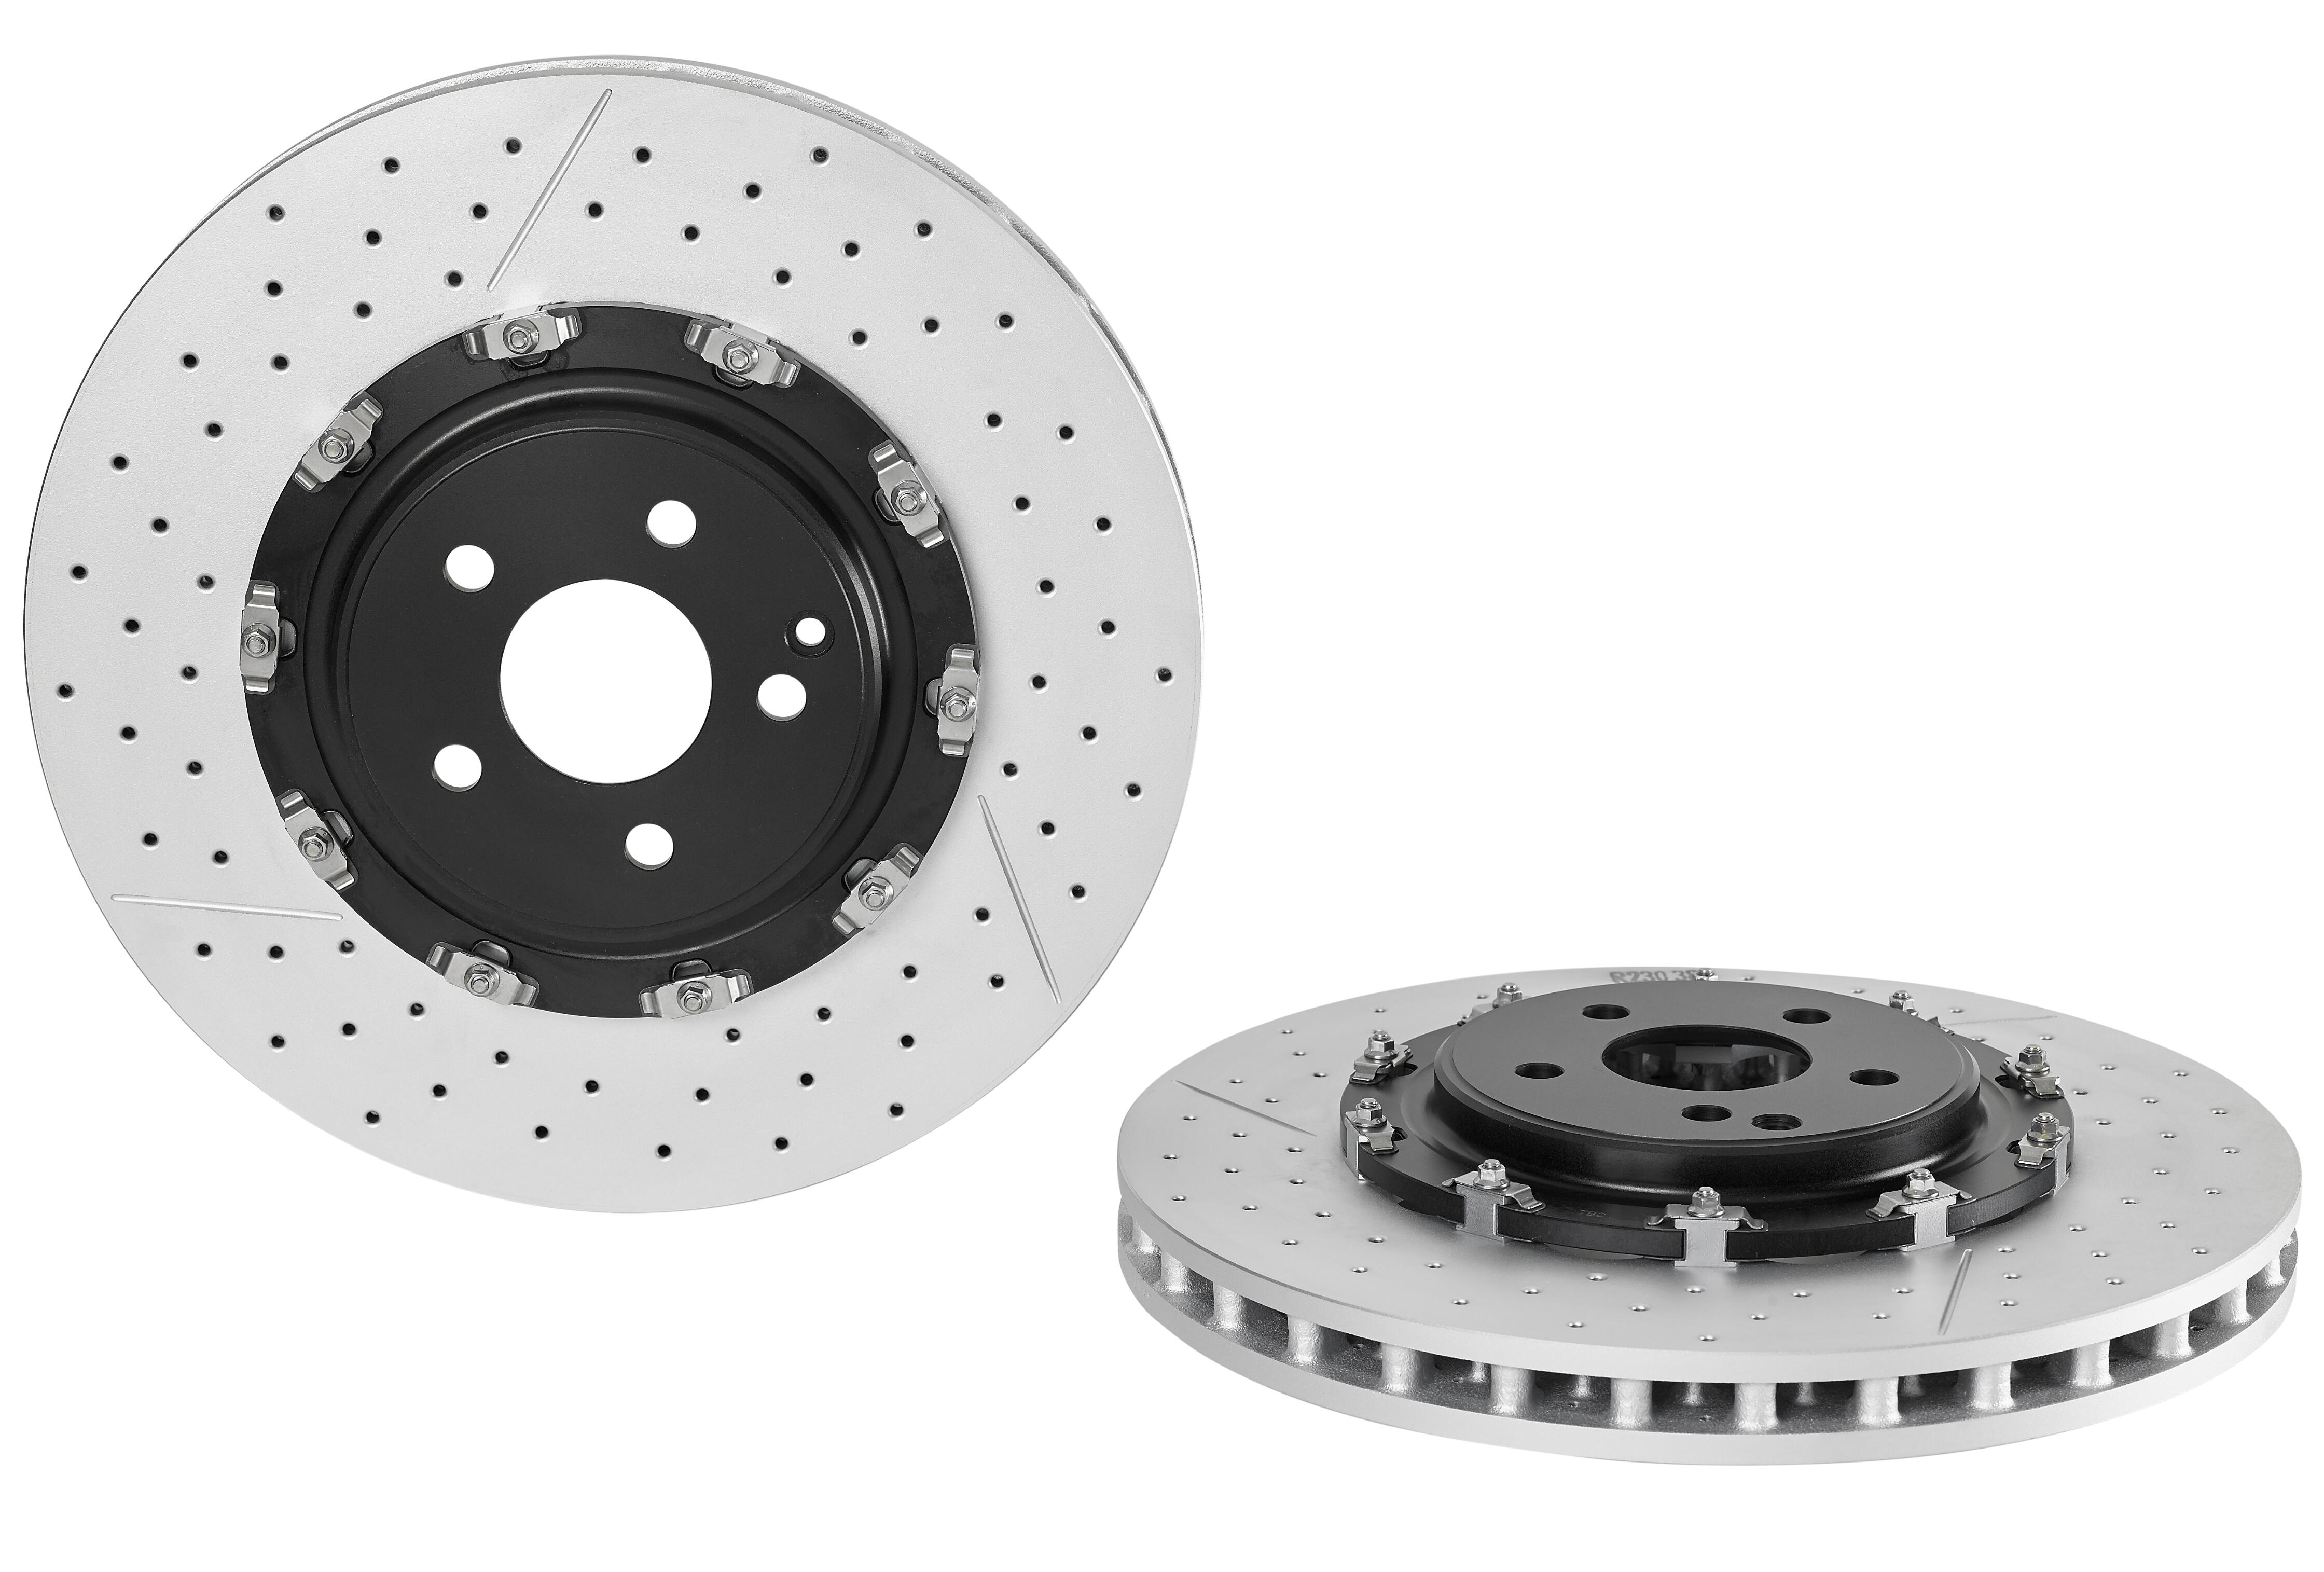 Mercedes Brakes Kit - Pads & Rotors Front and Rear (380mm/330mm) (Ceramic) 2304210912 - Brembo 2864604KIT